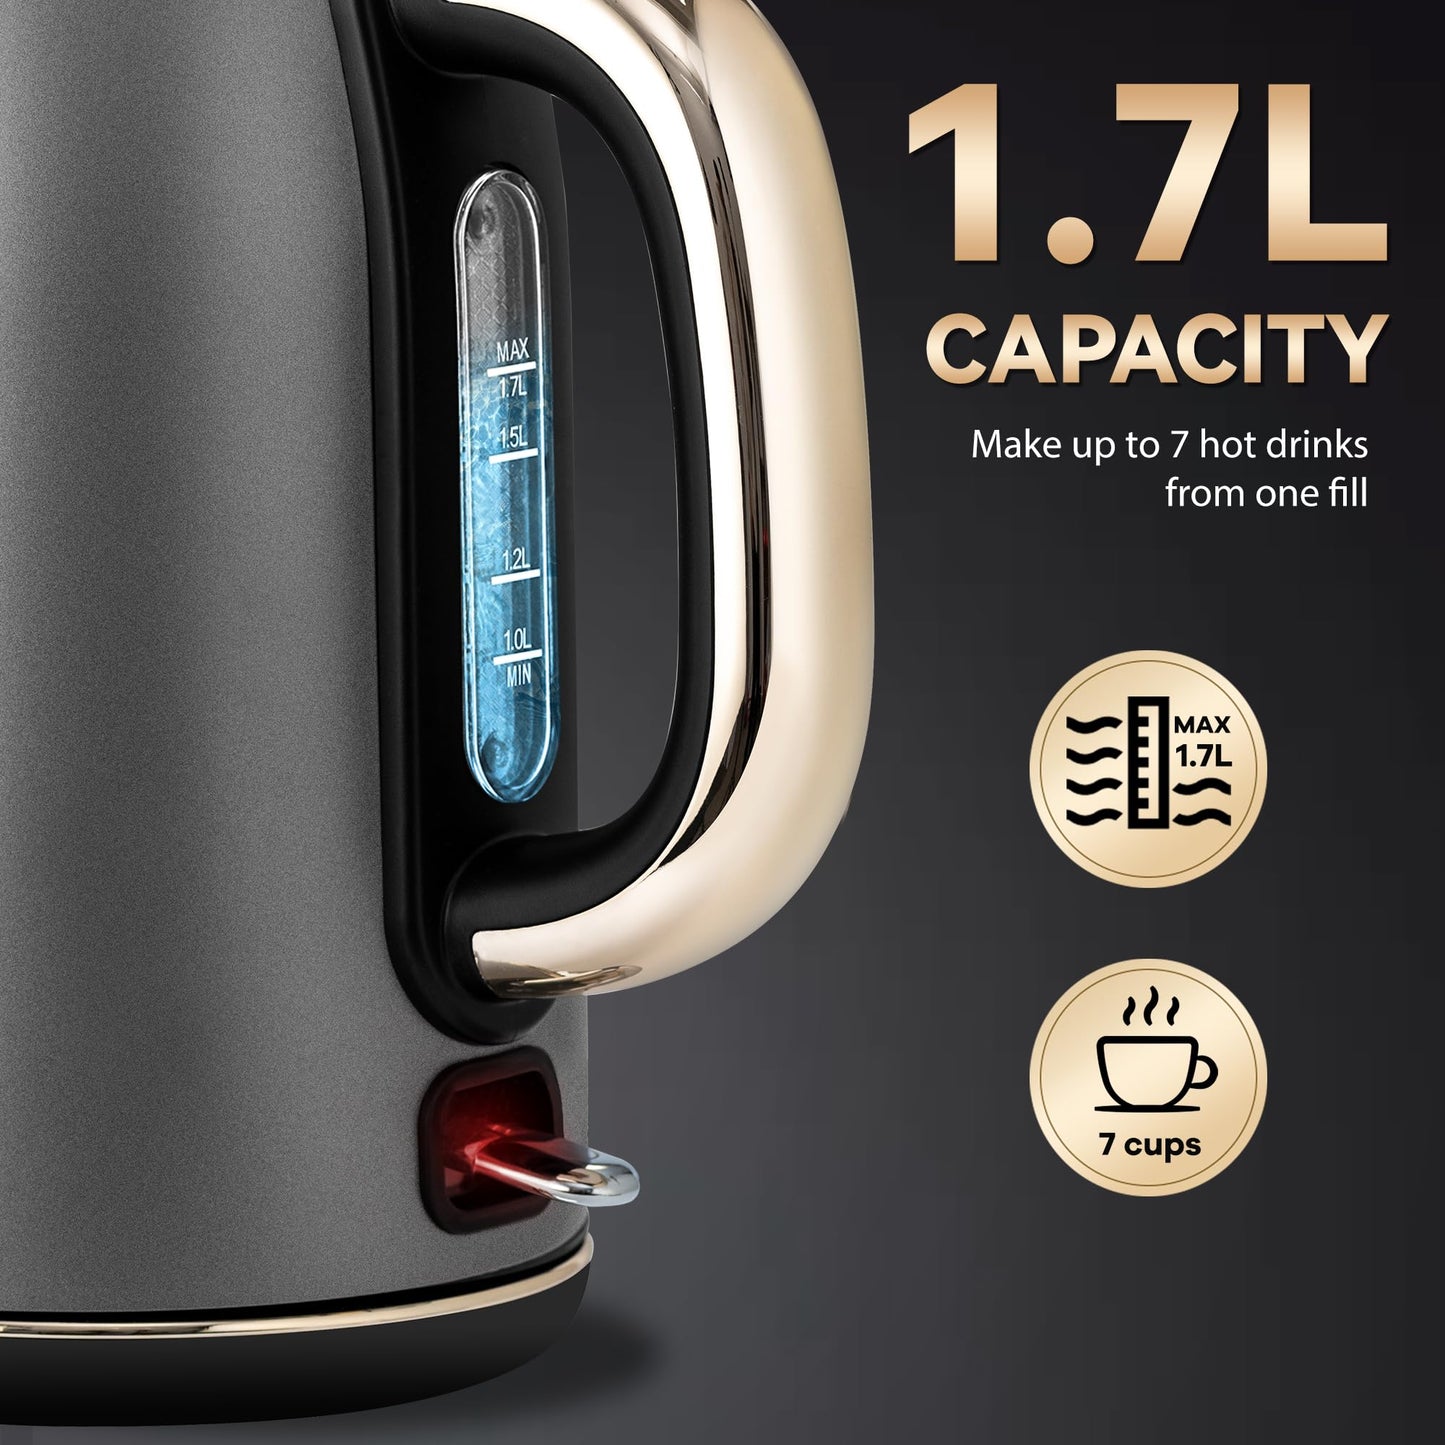 1.7L/1500W Fast Boiling Stainless Steel Electric Tea Kettle Cordless Water Boiler(Space Gery)